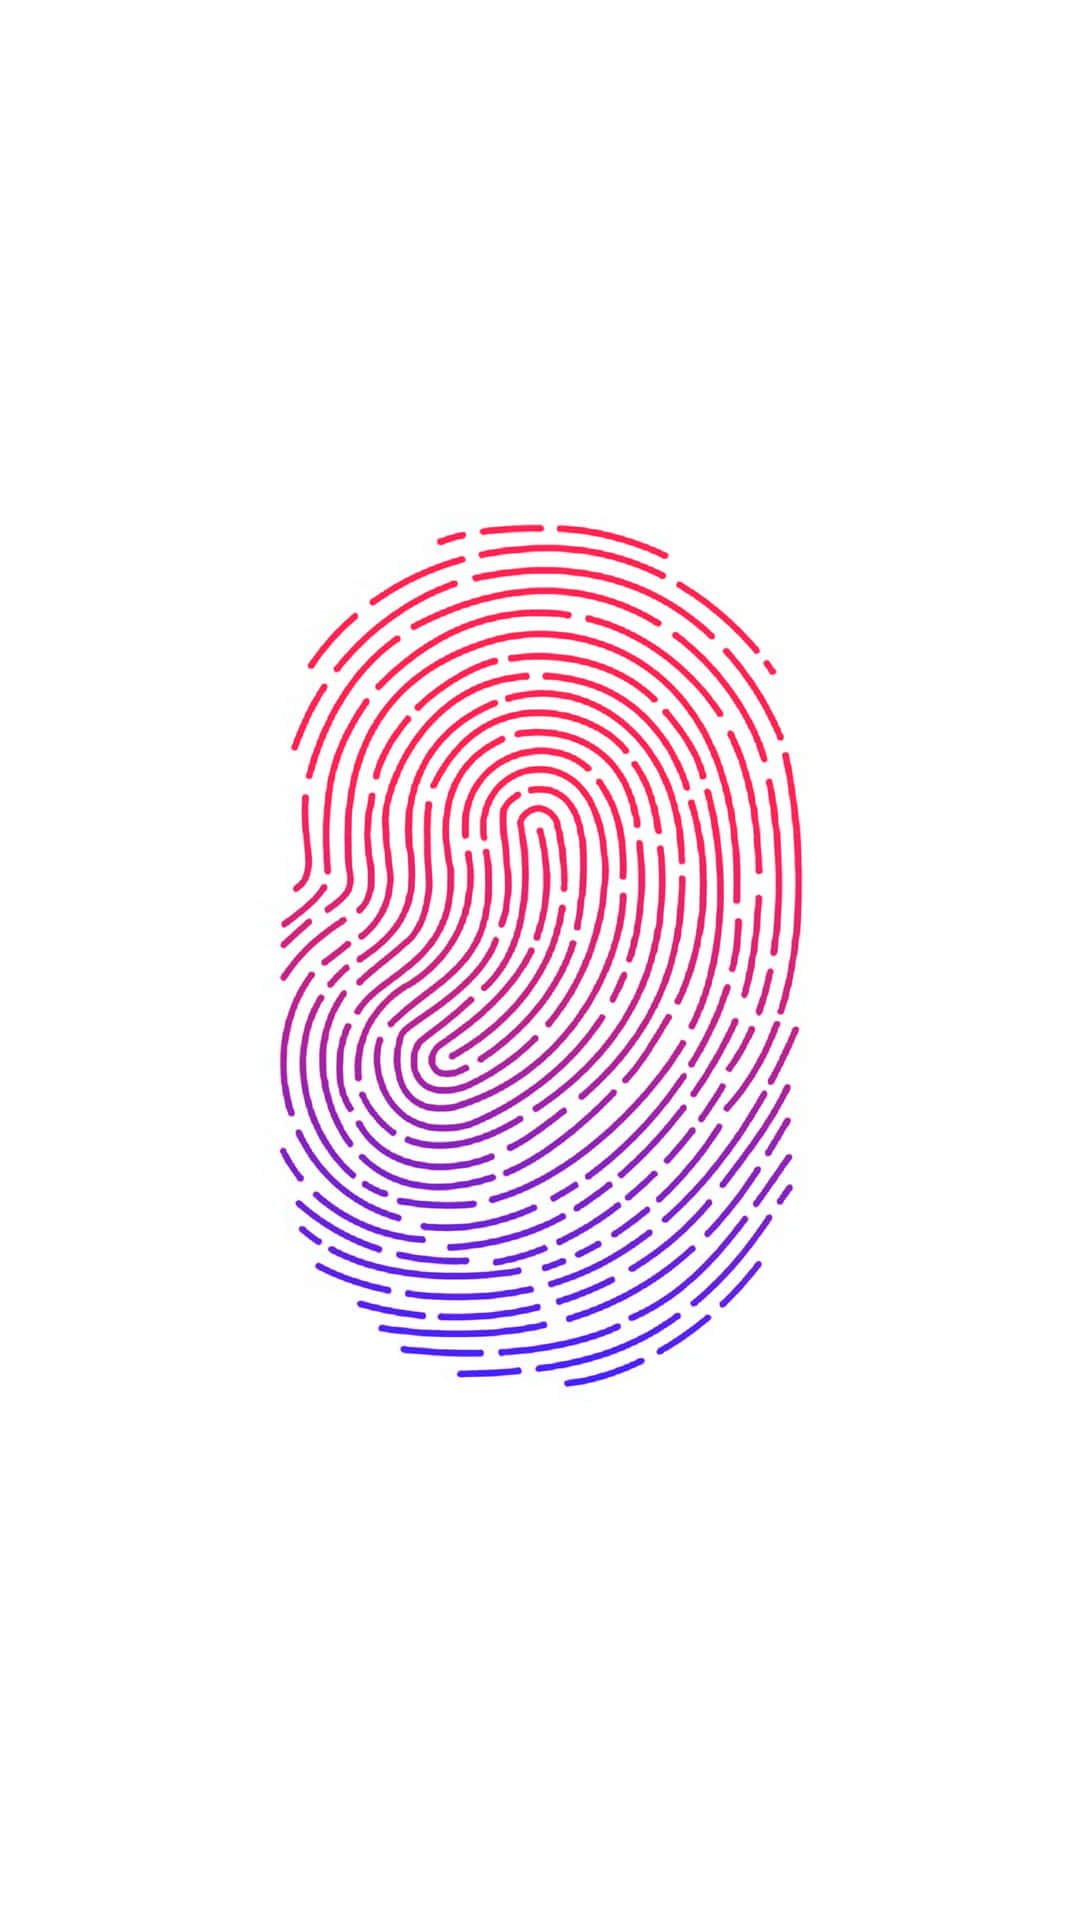 Unlock your Apple device quickly and securely with the power of Touch ID Wallpaper